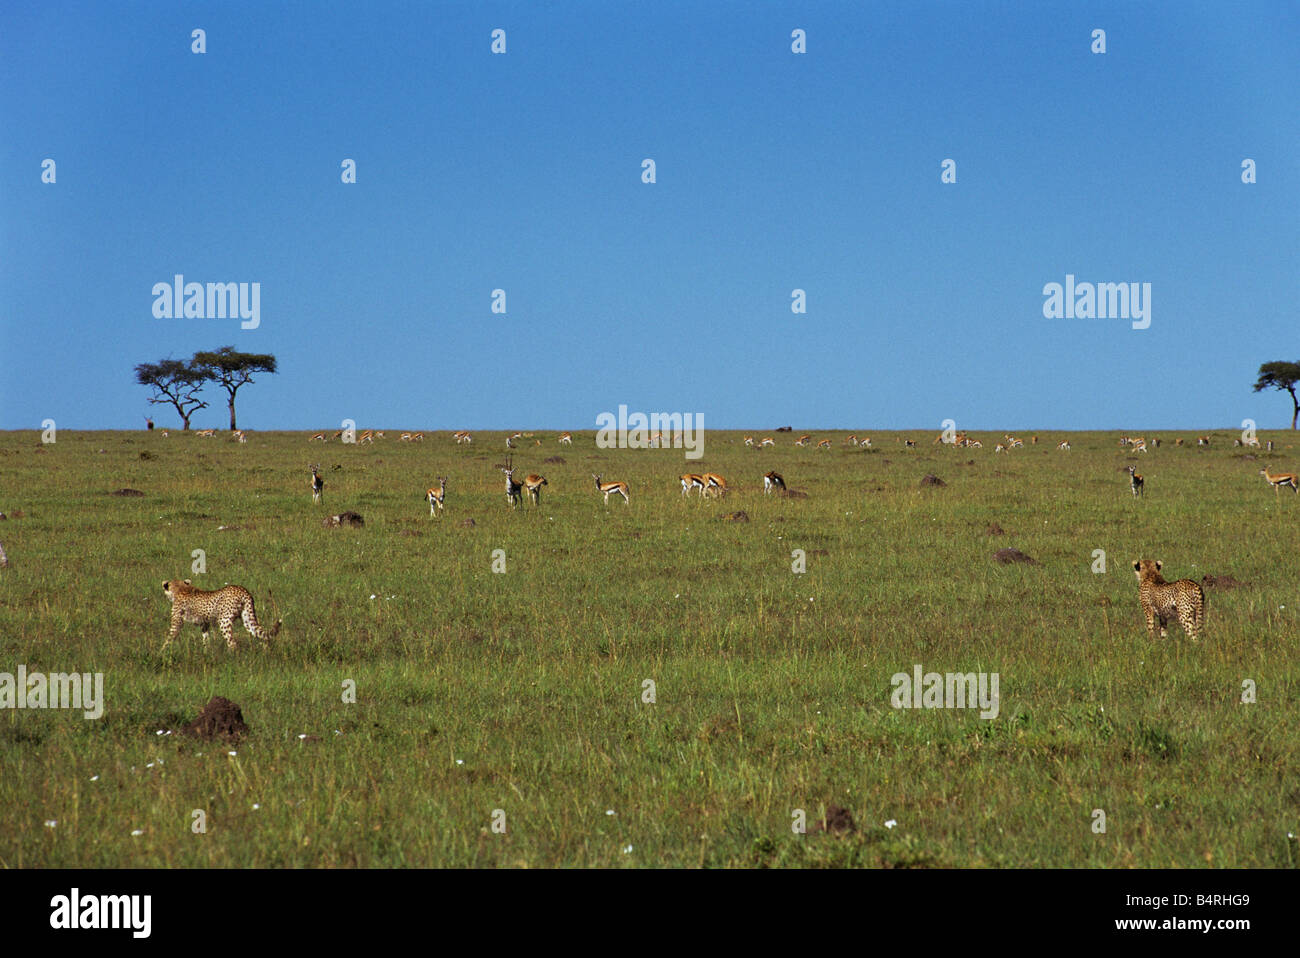 Two Cheetahs and a Herd of Gazelles Stock Photo